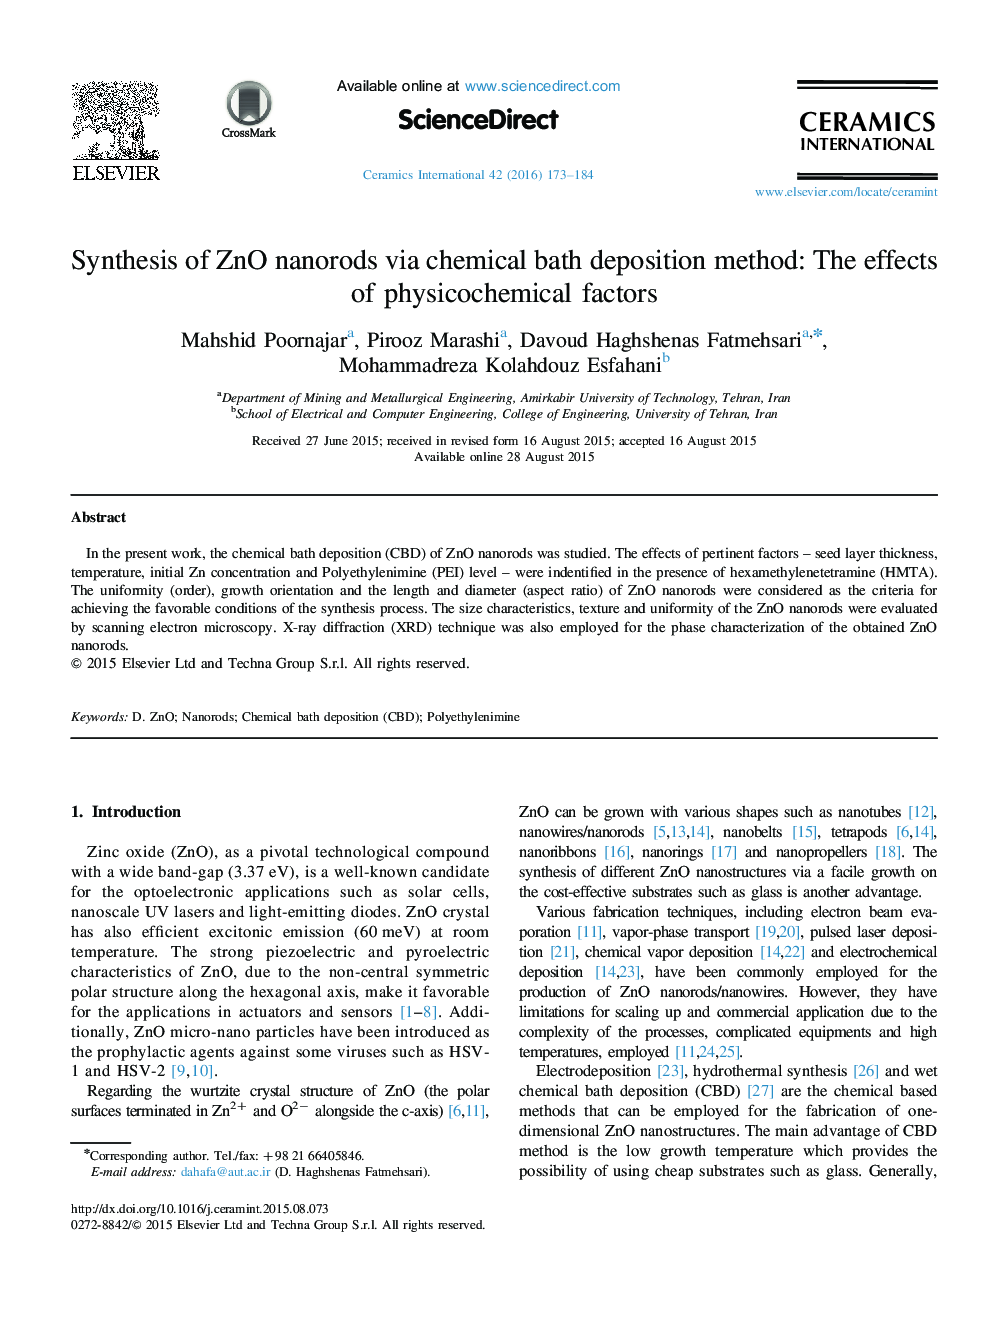 Synthesis of ZnO nanorods via chemical bath deposition method: The effects of physicochemical factors